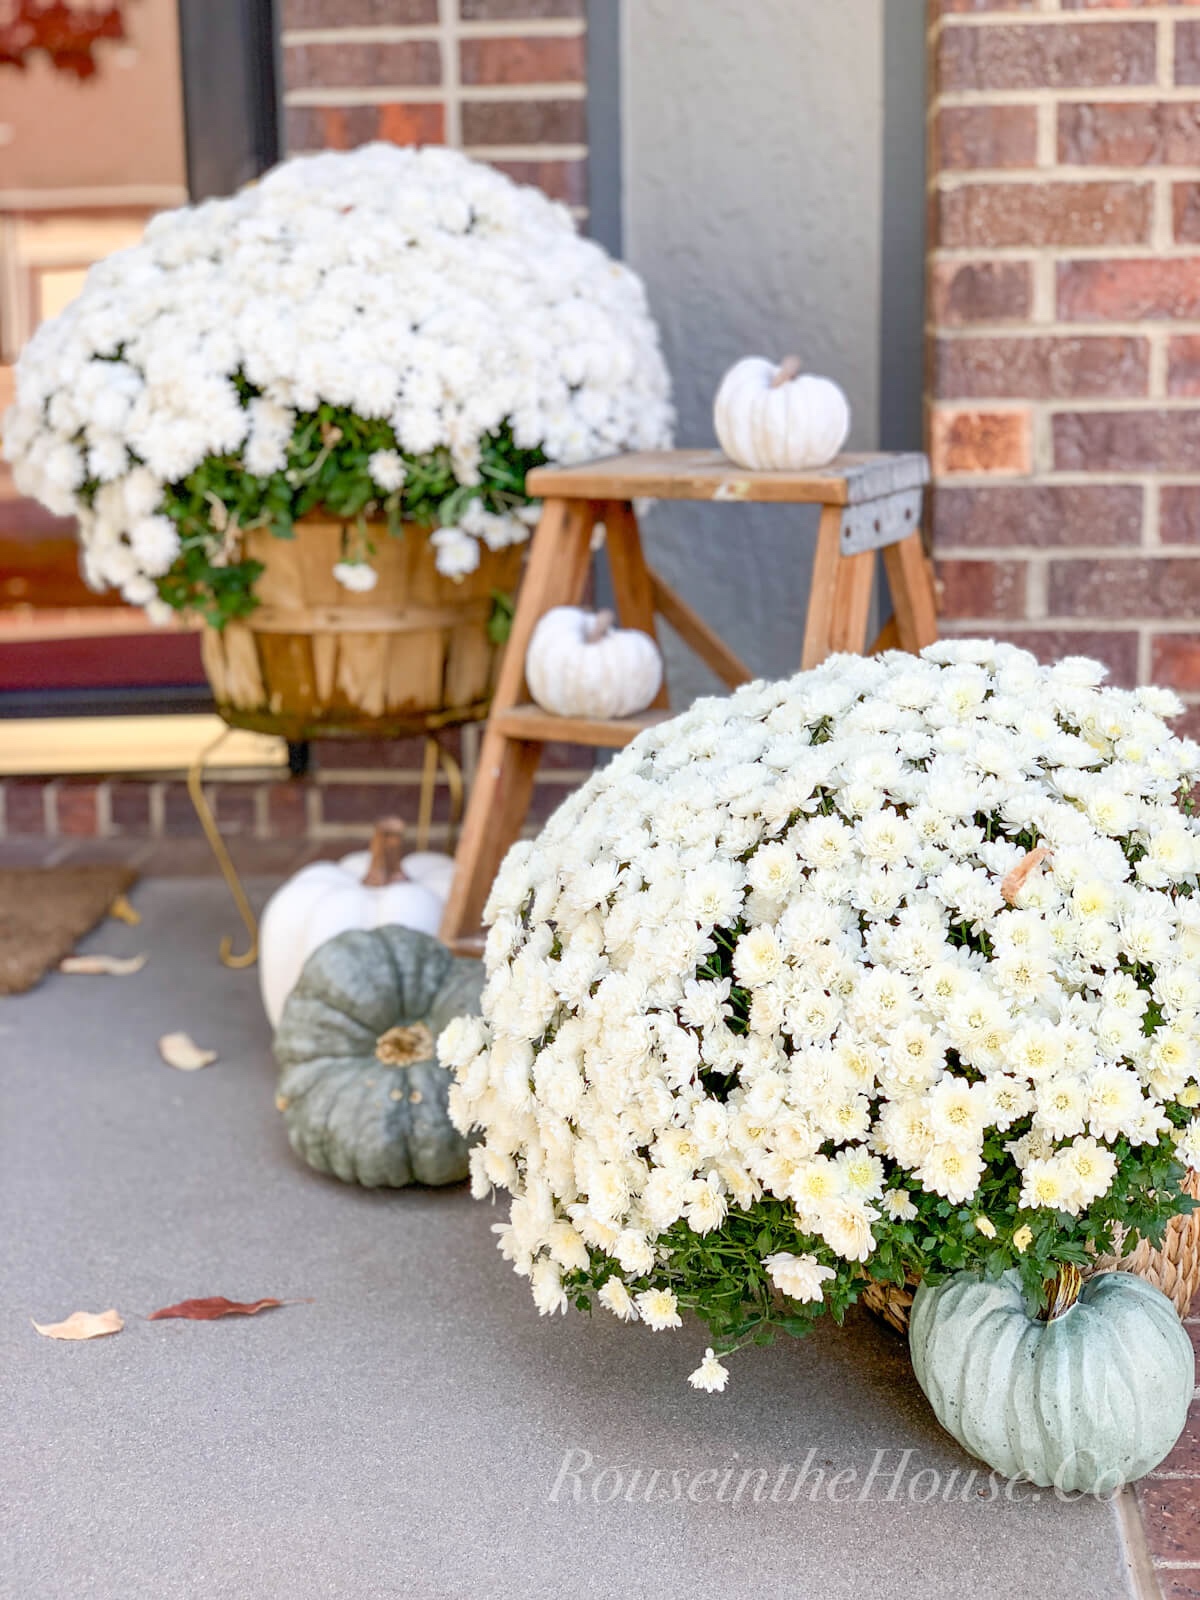 Outdoor fall decor on a front porch: bridal white mums surround a small, primitive ladder decorated with pumpkins.